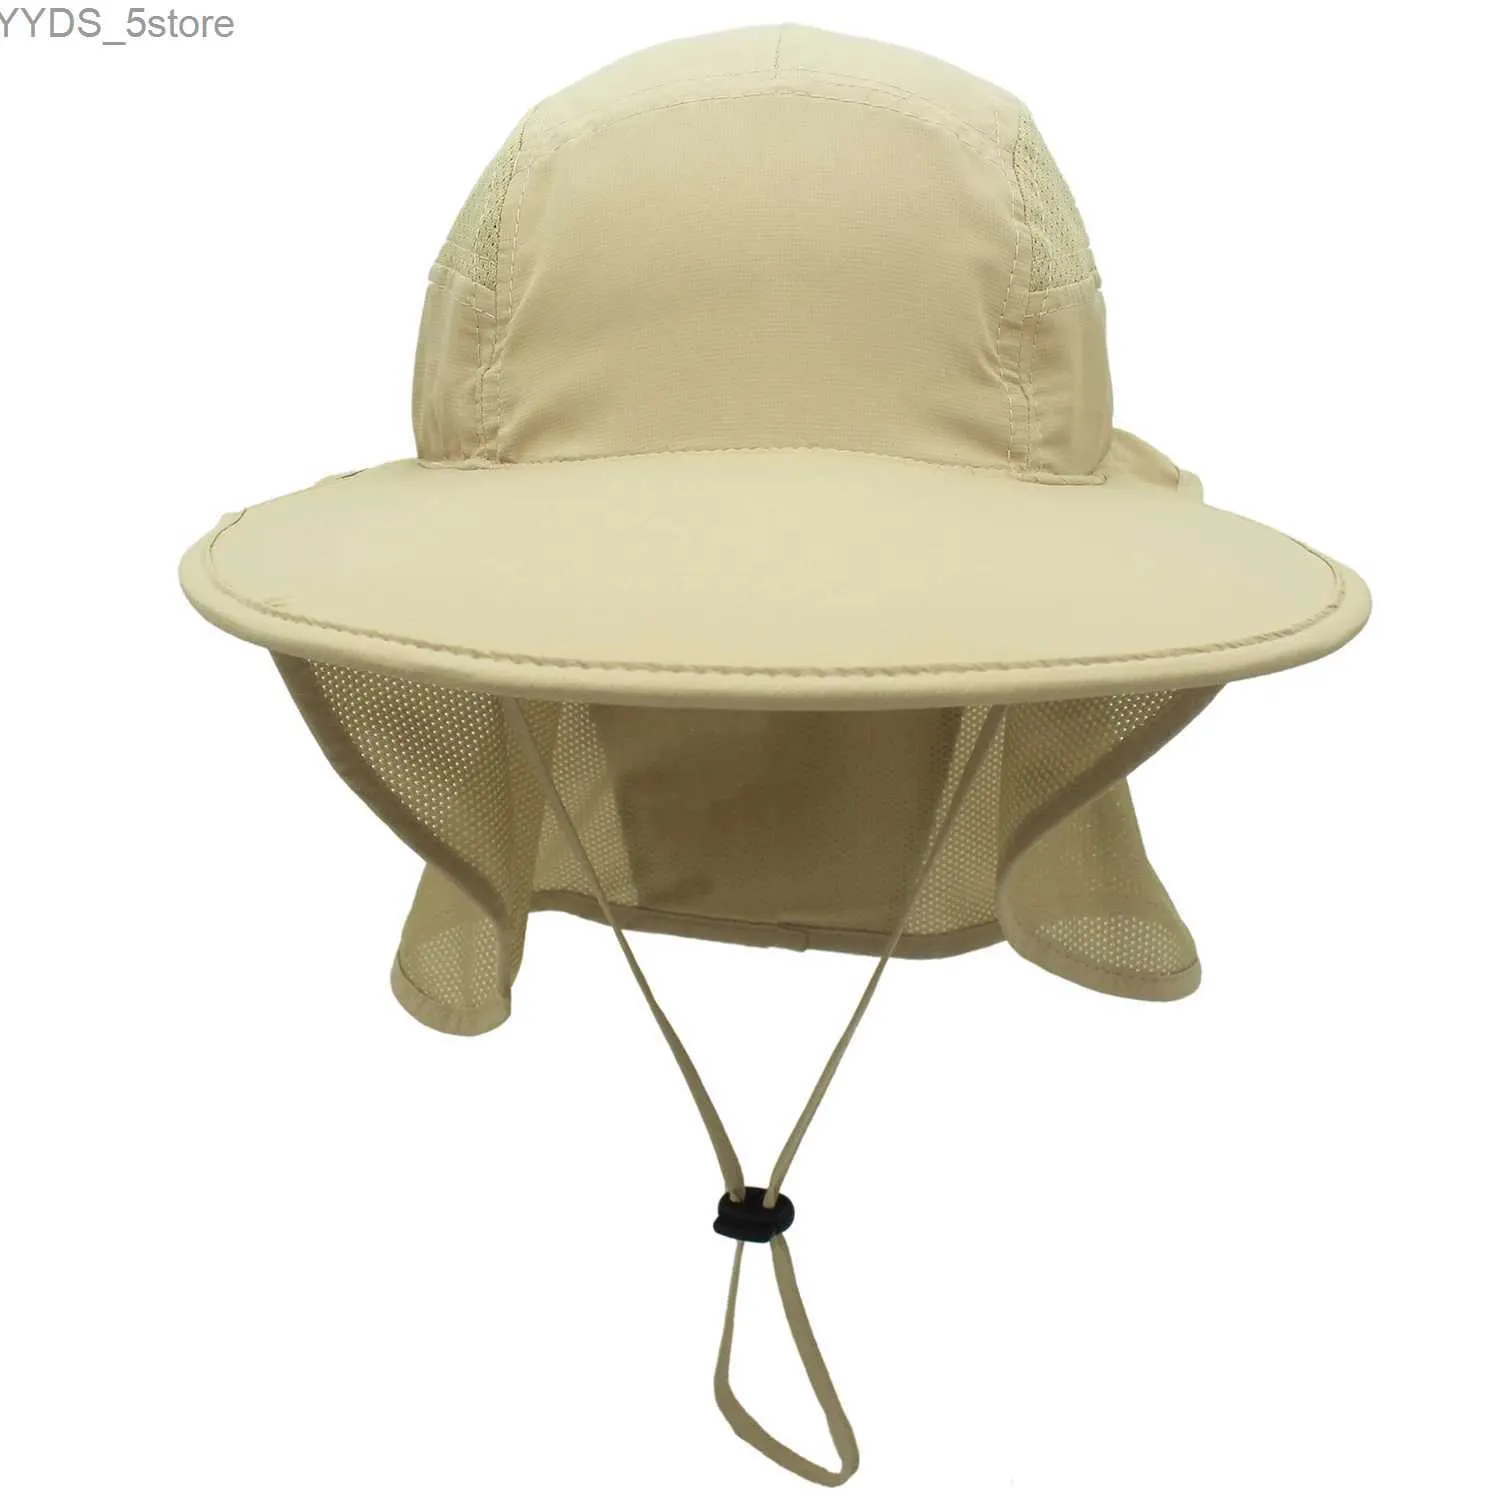 UV Wide Brimmed Packable Bucket Hat For Men And Women Multi Functional  Outdoor Sun Hat With Neck Protection For Riding And Hunting YQ231116 From  Yyds_5store, $11.43